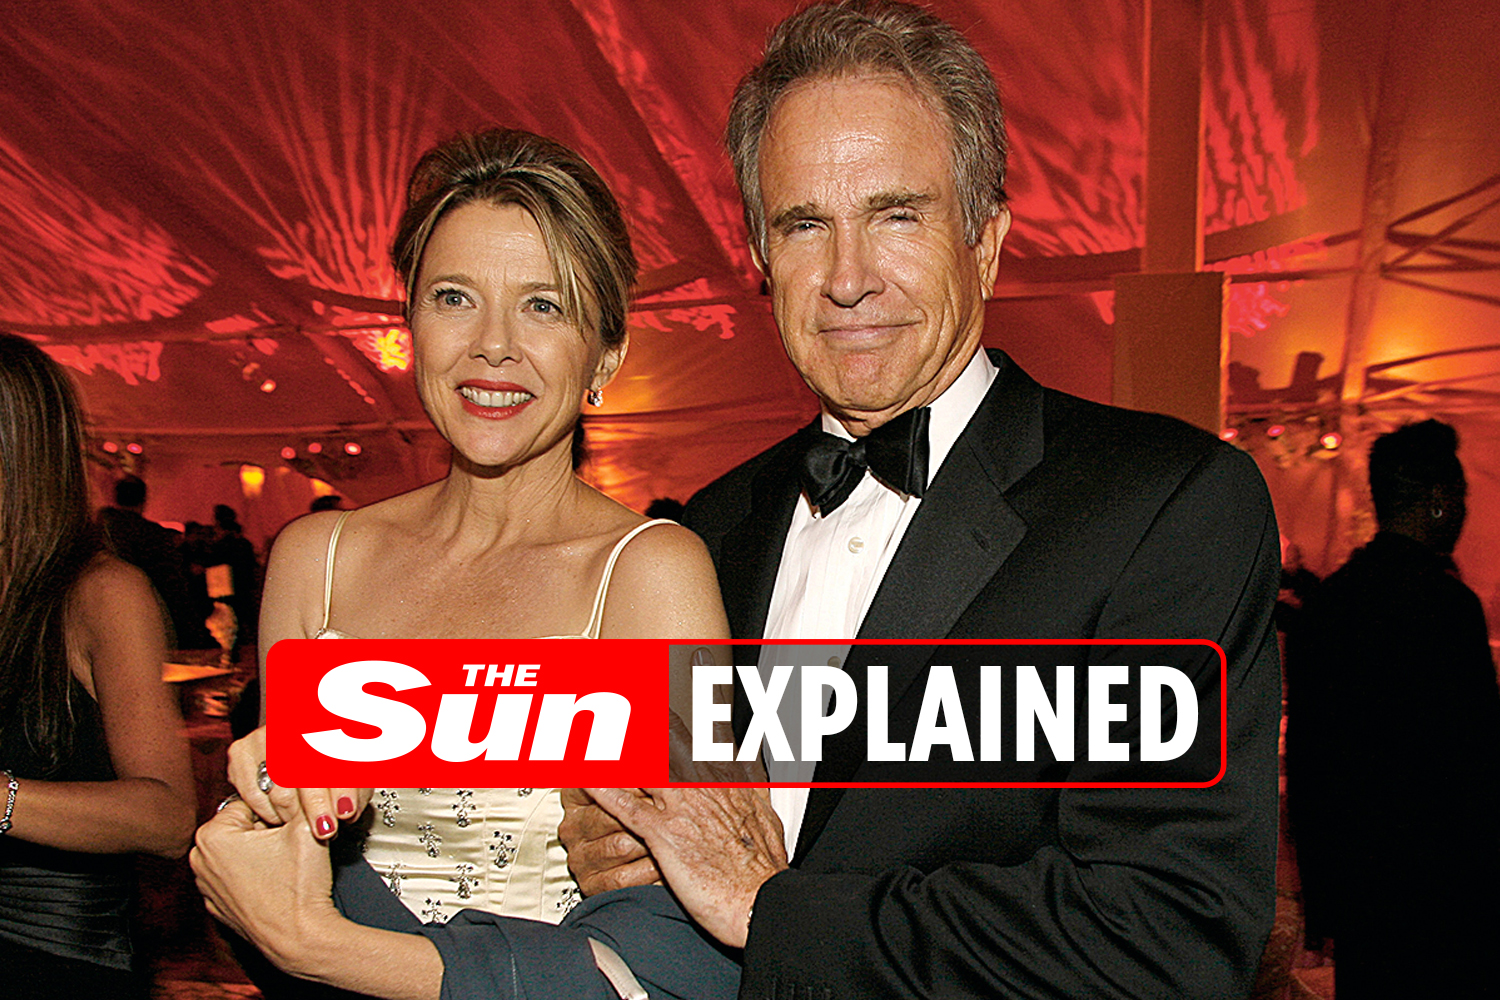 Who Is Annette Bening Married To? Discover Her Husband And Love Story